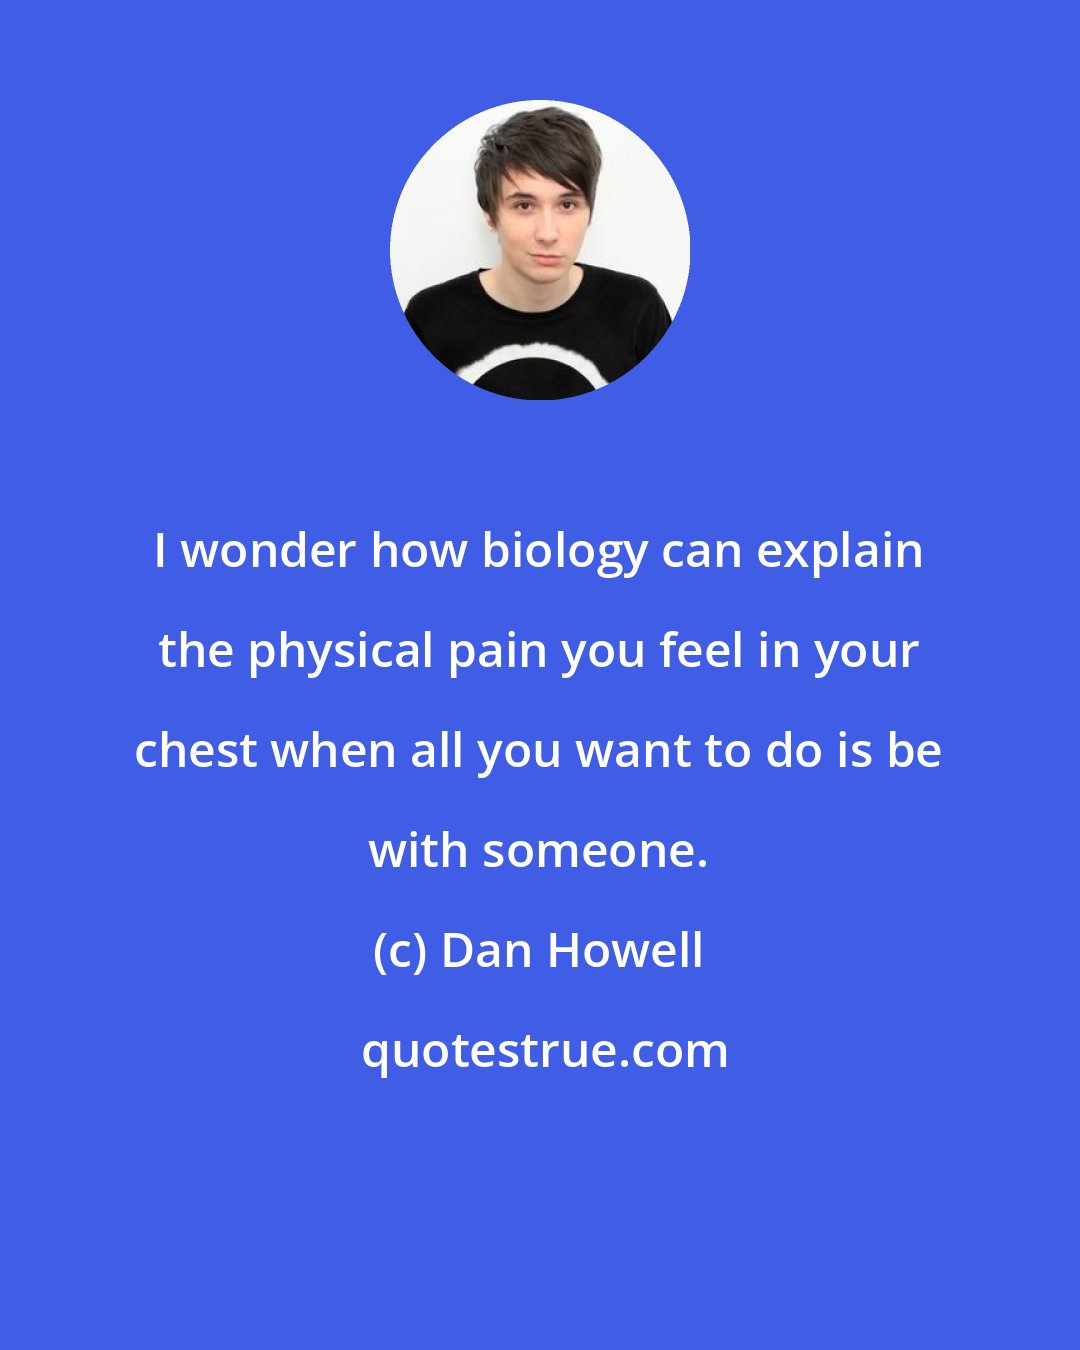 Dan Howell: I wonder how biology can explain the physical pain you feel in your chest when all you want to do is be with someone.